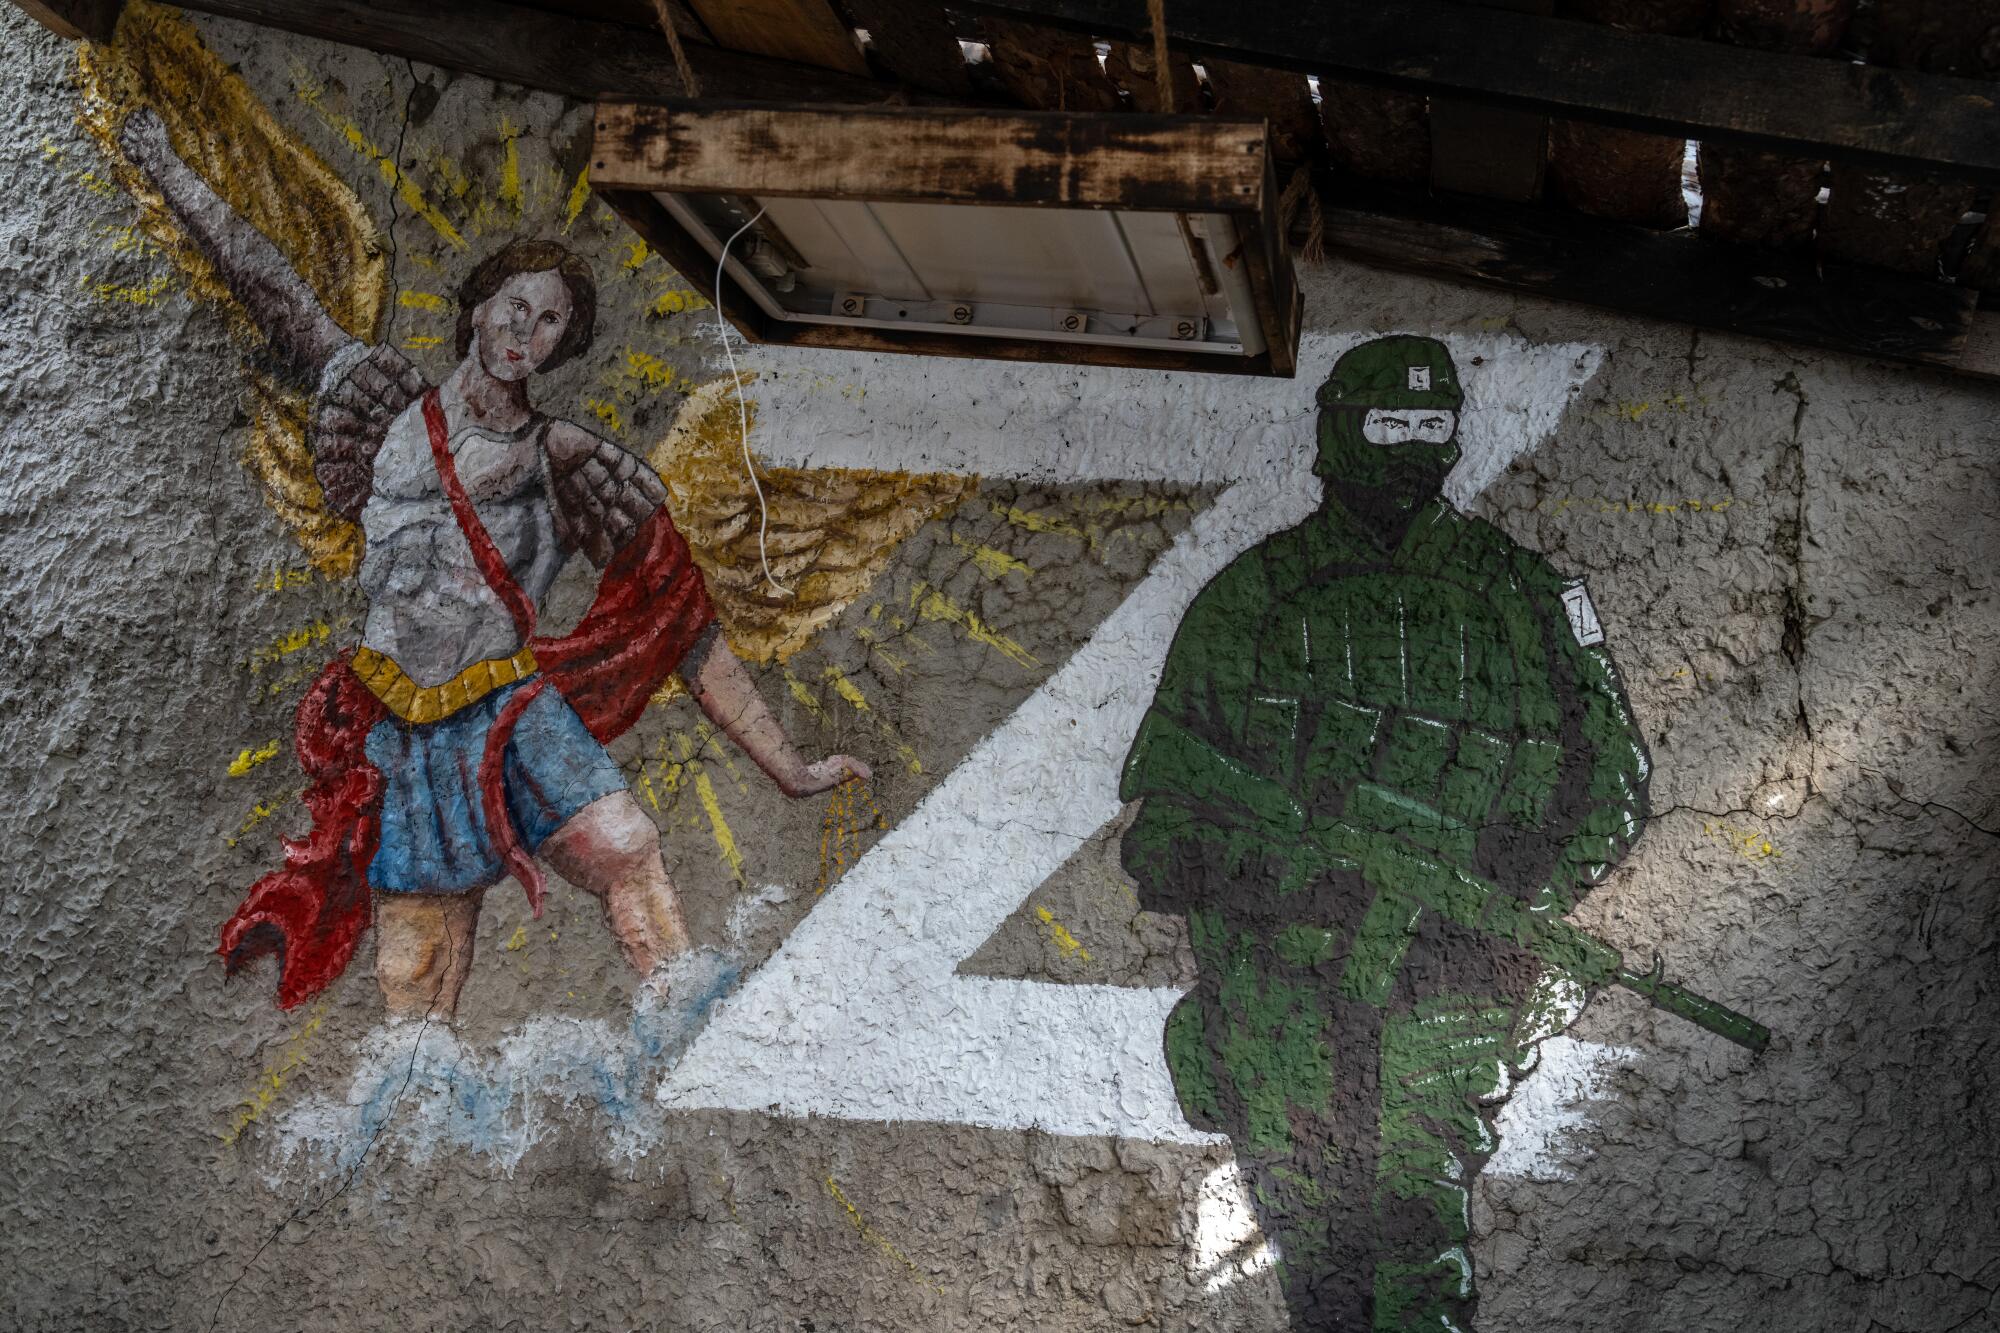 A picture of a Russian soldier next to the "Z" military symbol and St. Michael the Archangel painted on a wall  